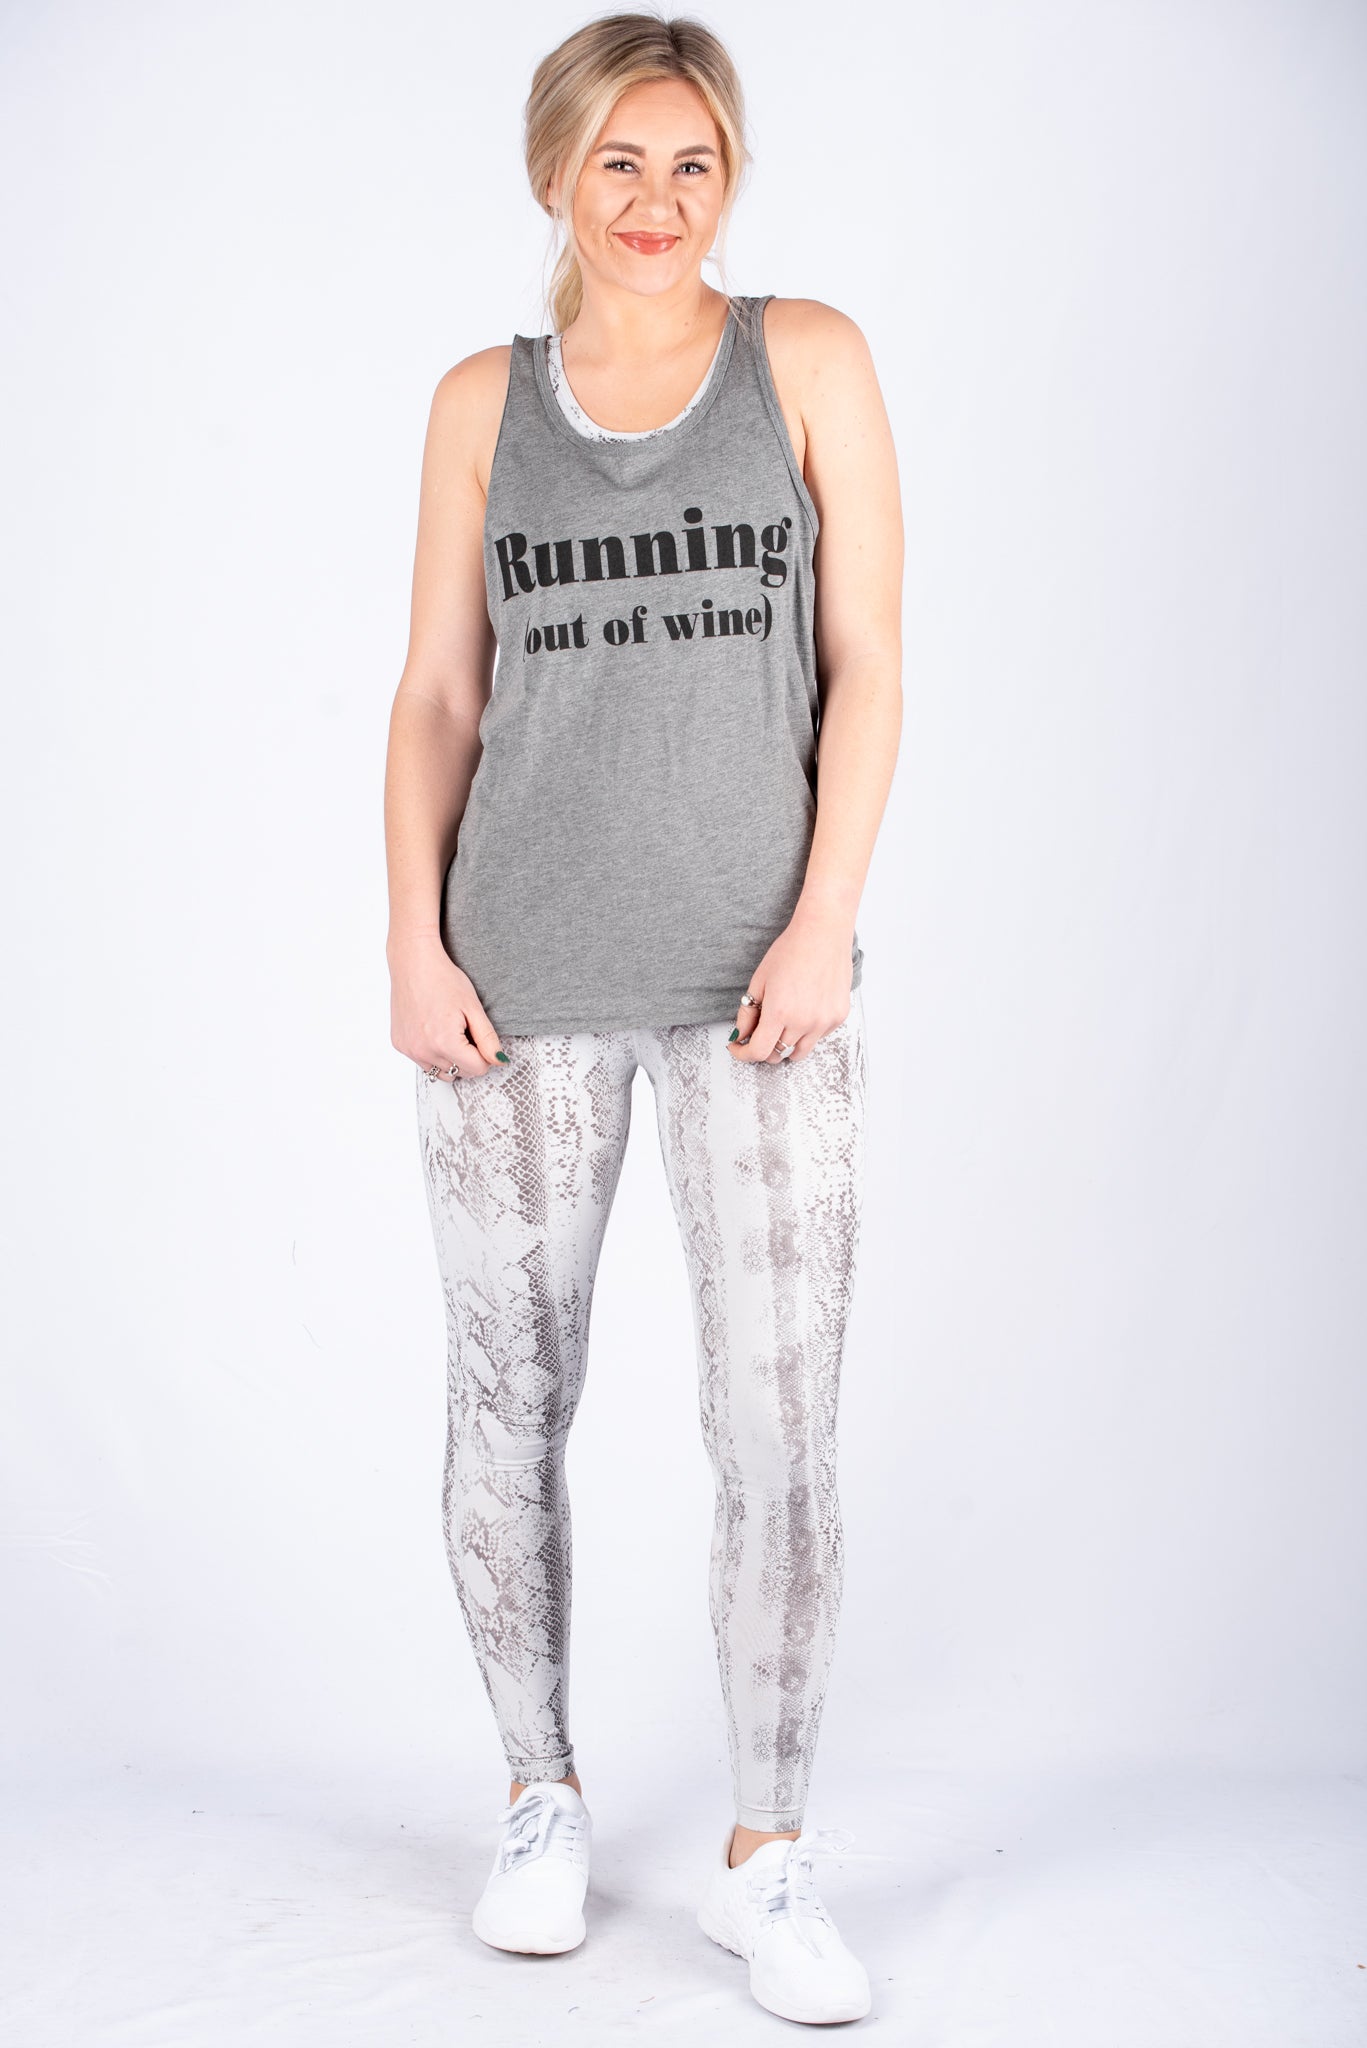 Running out of wine unisex tank top heather grey - Trendy Tank Top - Cute Graphic Tee Fashion at Lush Fashion Lounge Boutique in Oklahoma